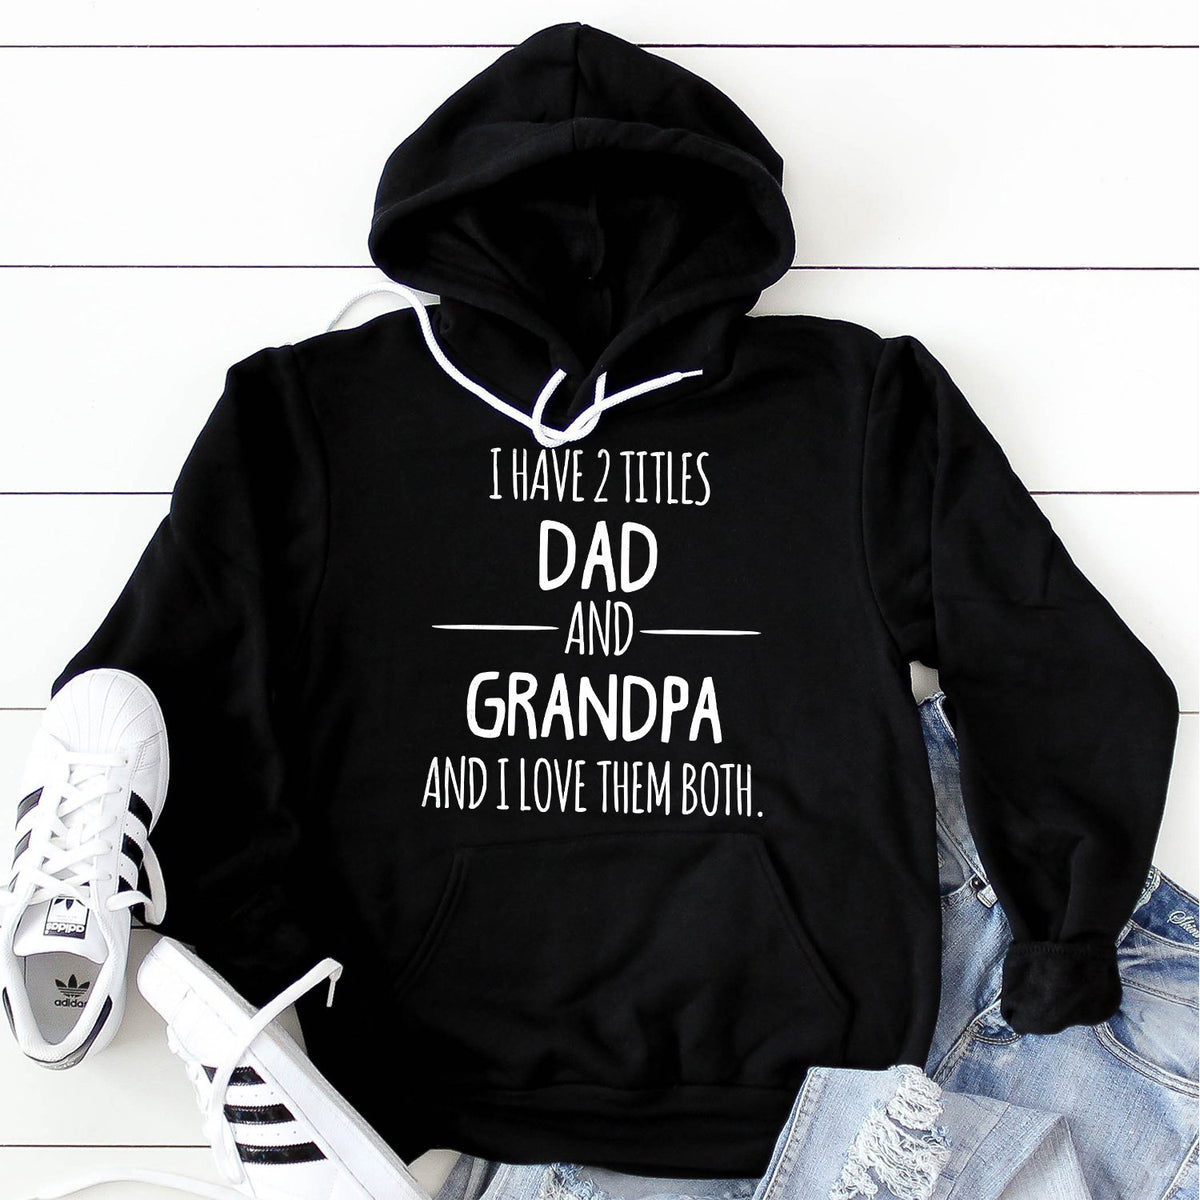 I Have 2 Titles Dad and Grandpa and I Love Them Both - Hoodie Sweatshirt